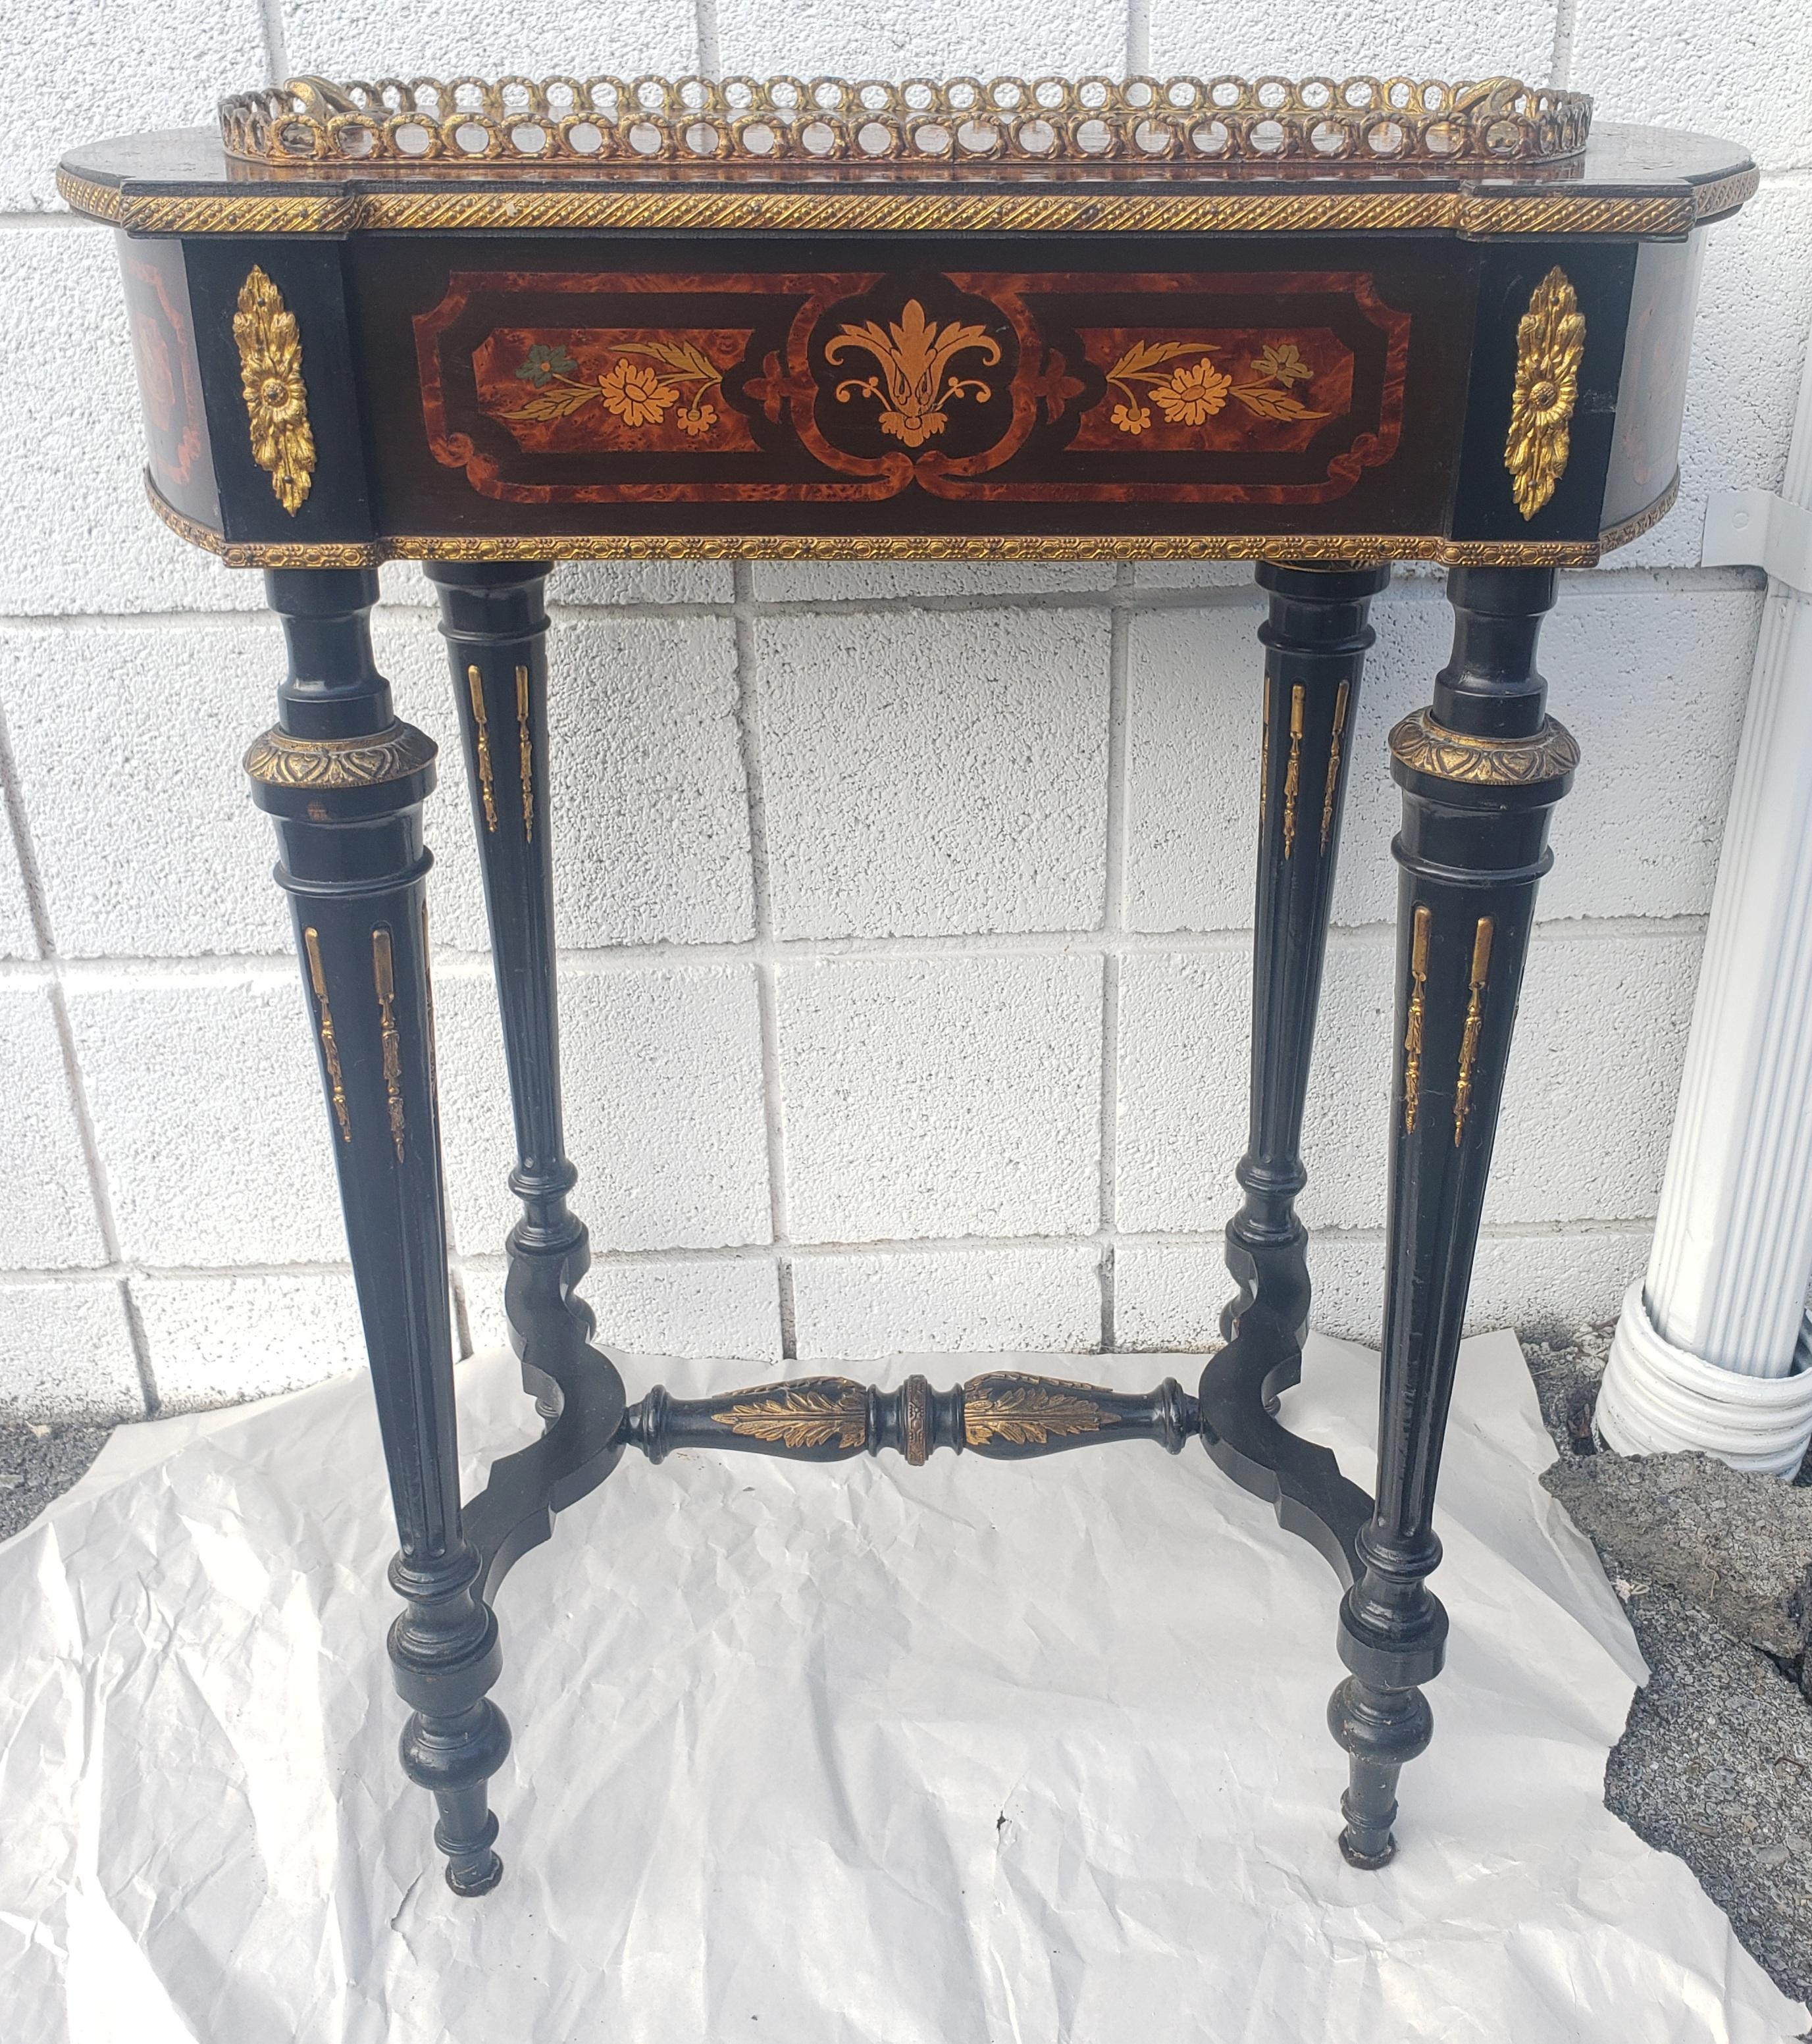 A late 19th century Napoleon III Brass Marquetry Boulle Inlay and Ebonized Wood Planter Table. Exceptional craftsmanship. Beautifully decorated. Measures 25